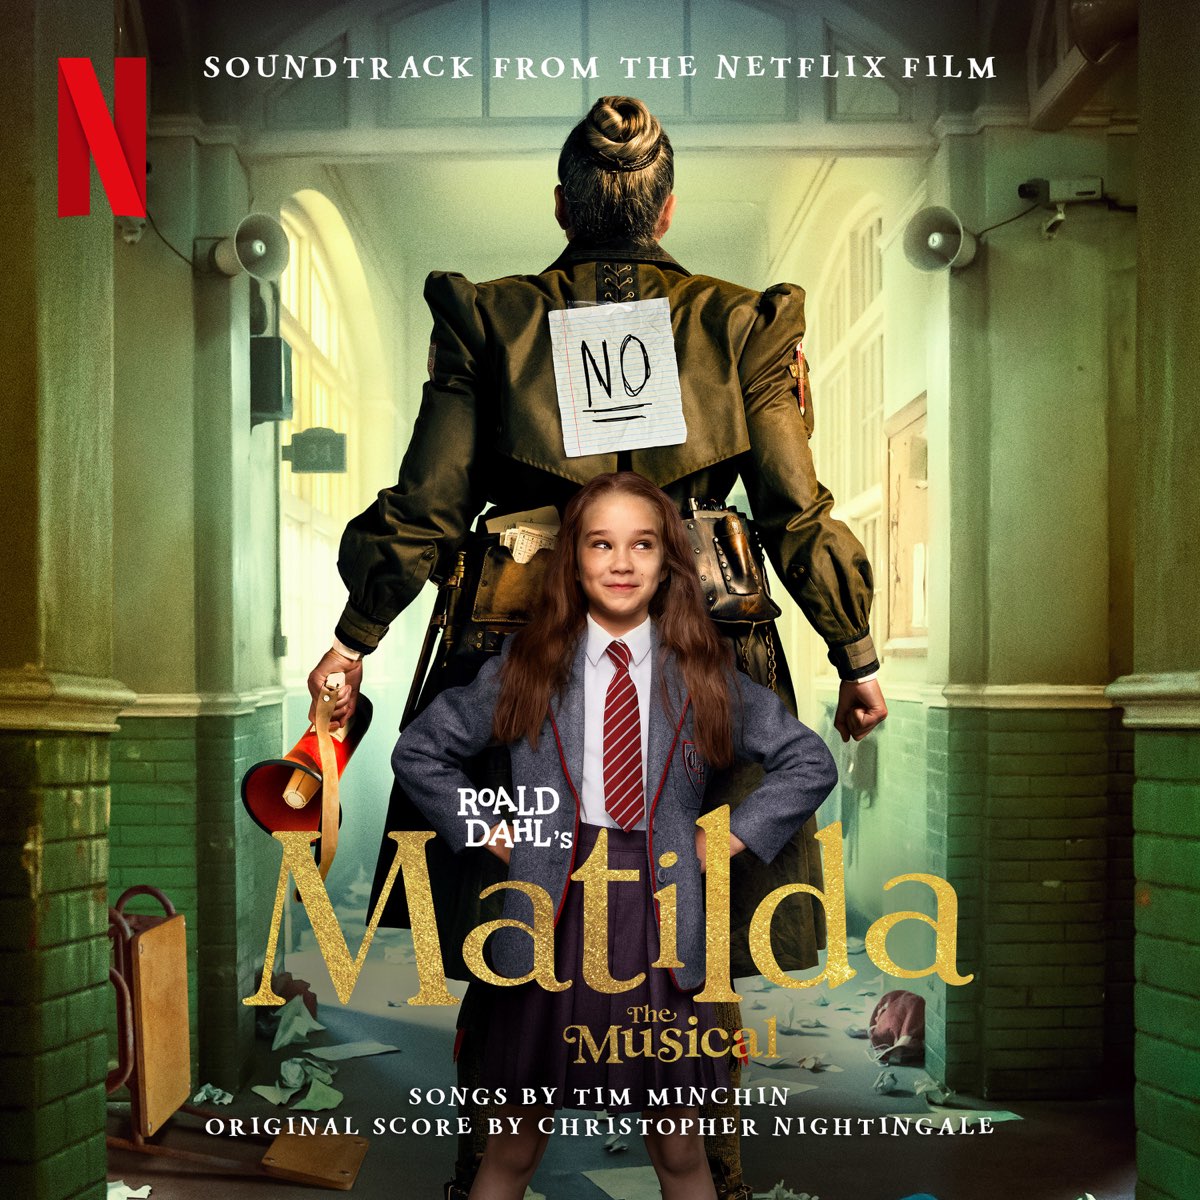 ‎Roald Dahl's Matilda The Musical (Soundtrack from the Netflix Film) by